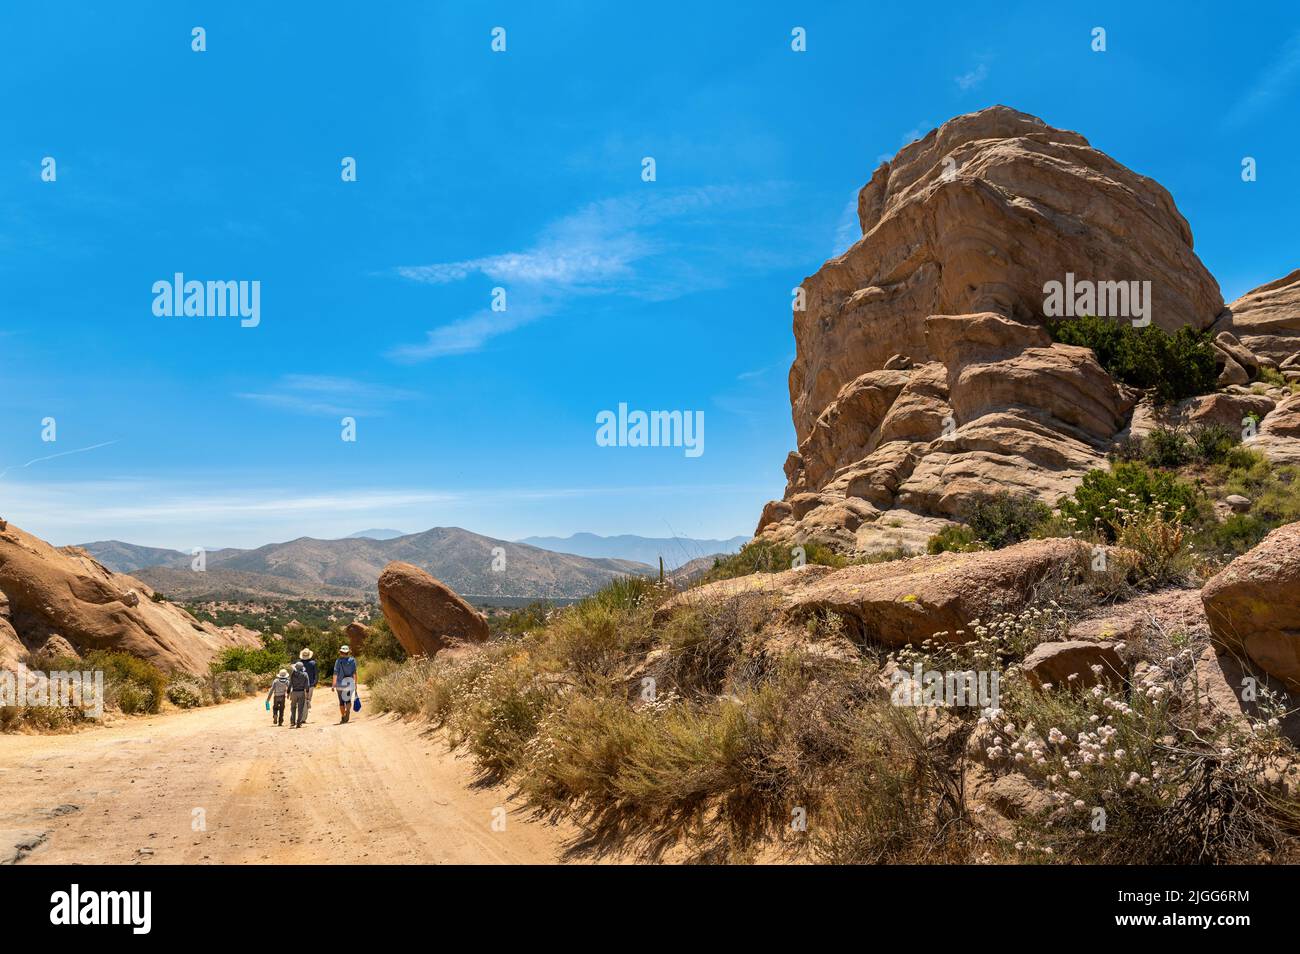 Vasquez Rocks Natural Area Park is a 932-acre park located in the Sierra Pelona in northern Los Angeles County, California. It is known for its rock f Stock Photo